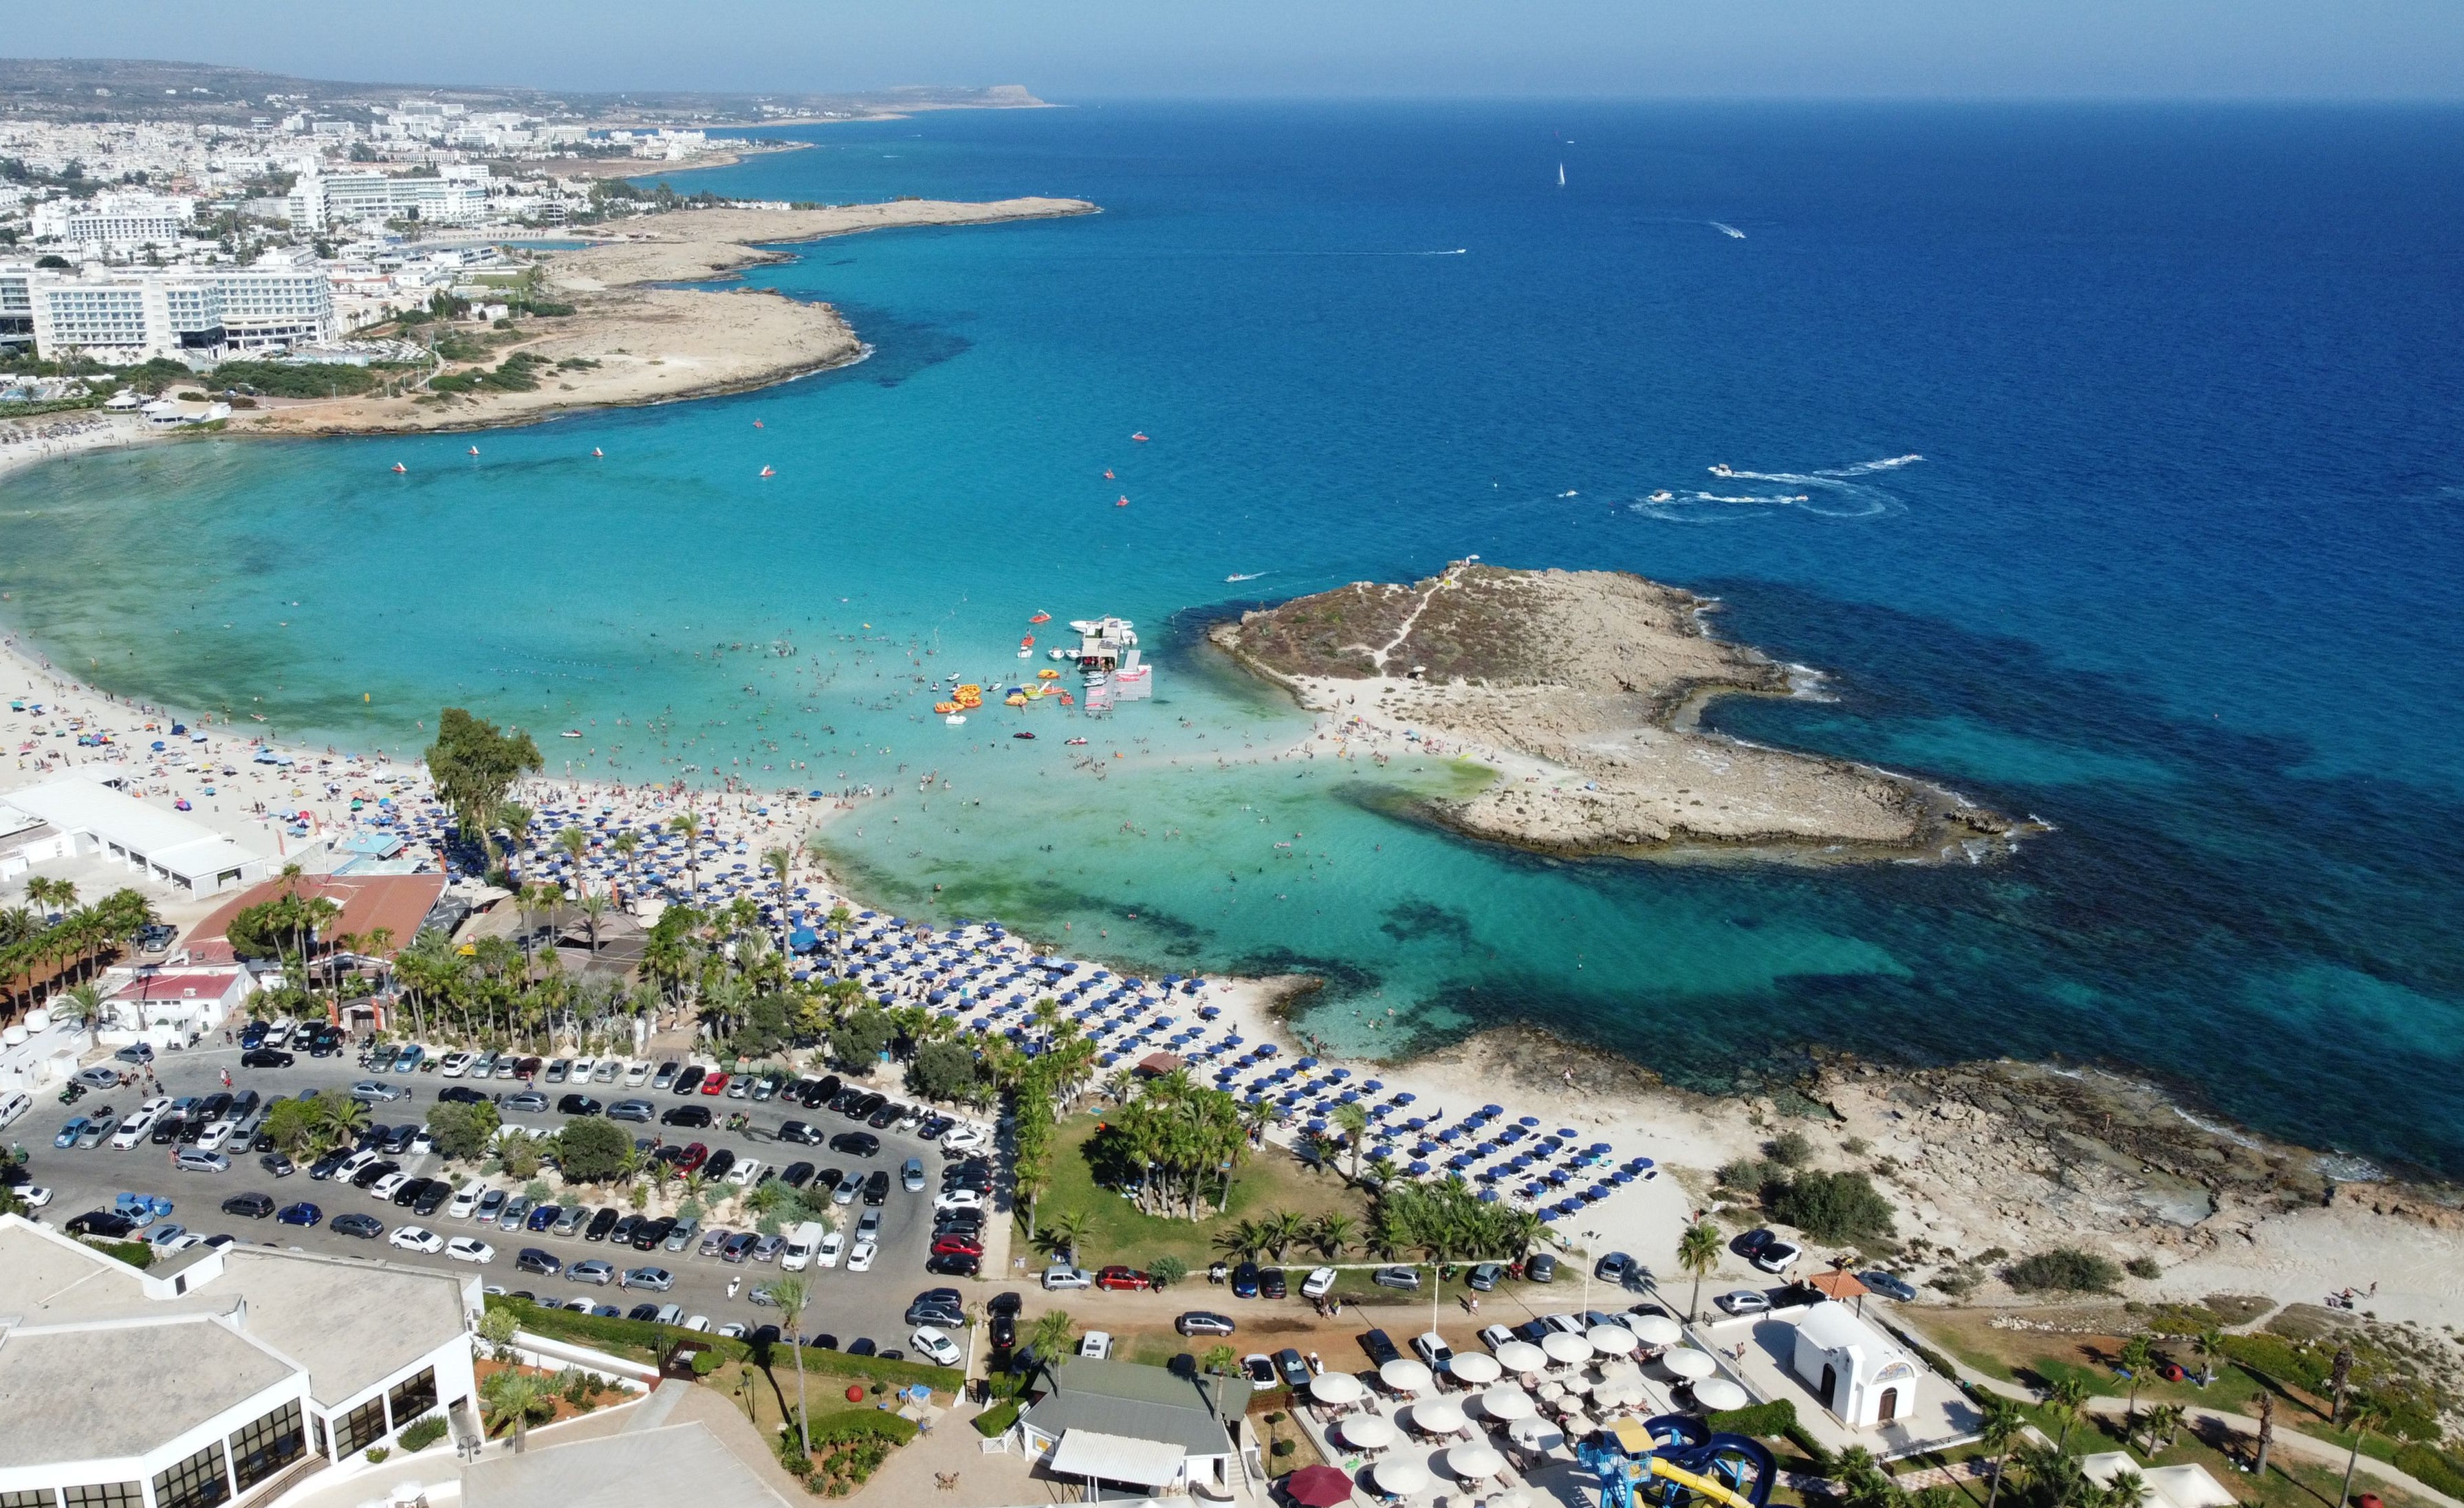 Nissi Beach in the Cypriot resort town of Ayia Napa